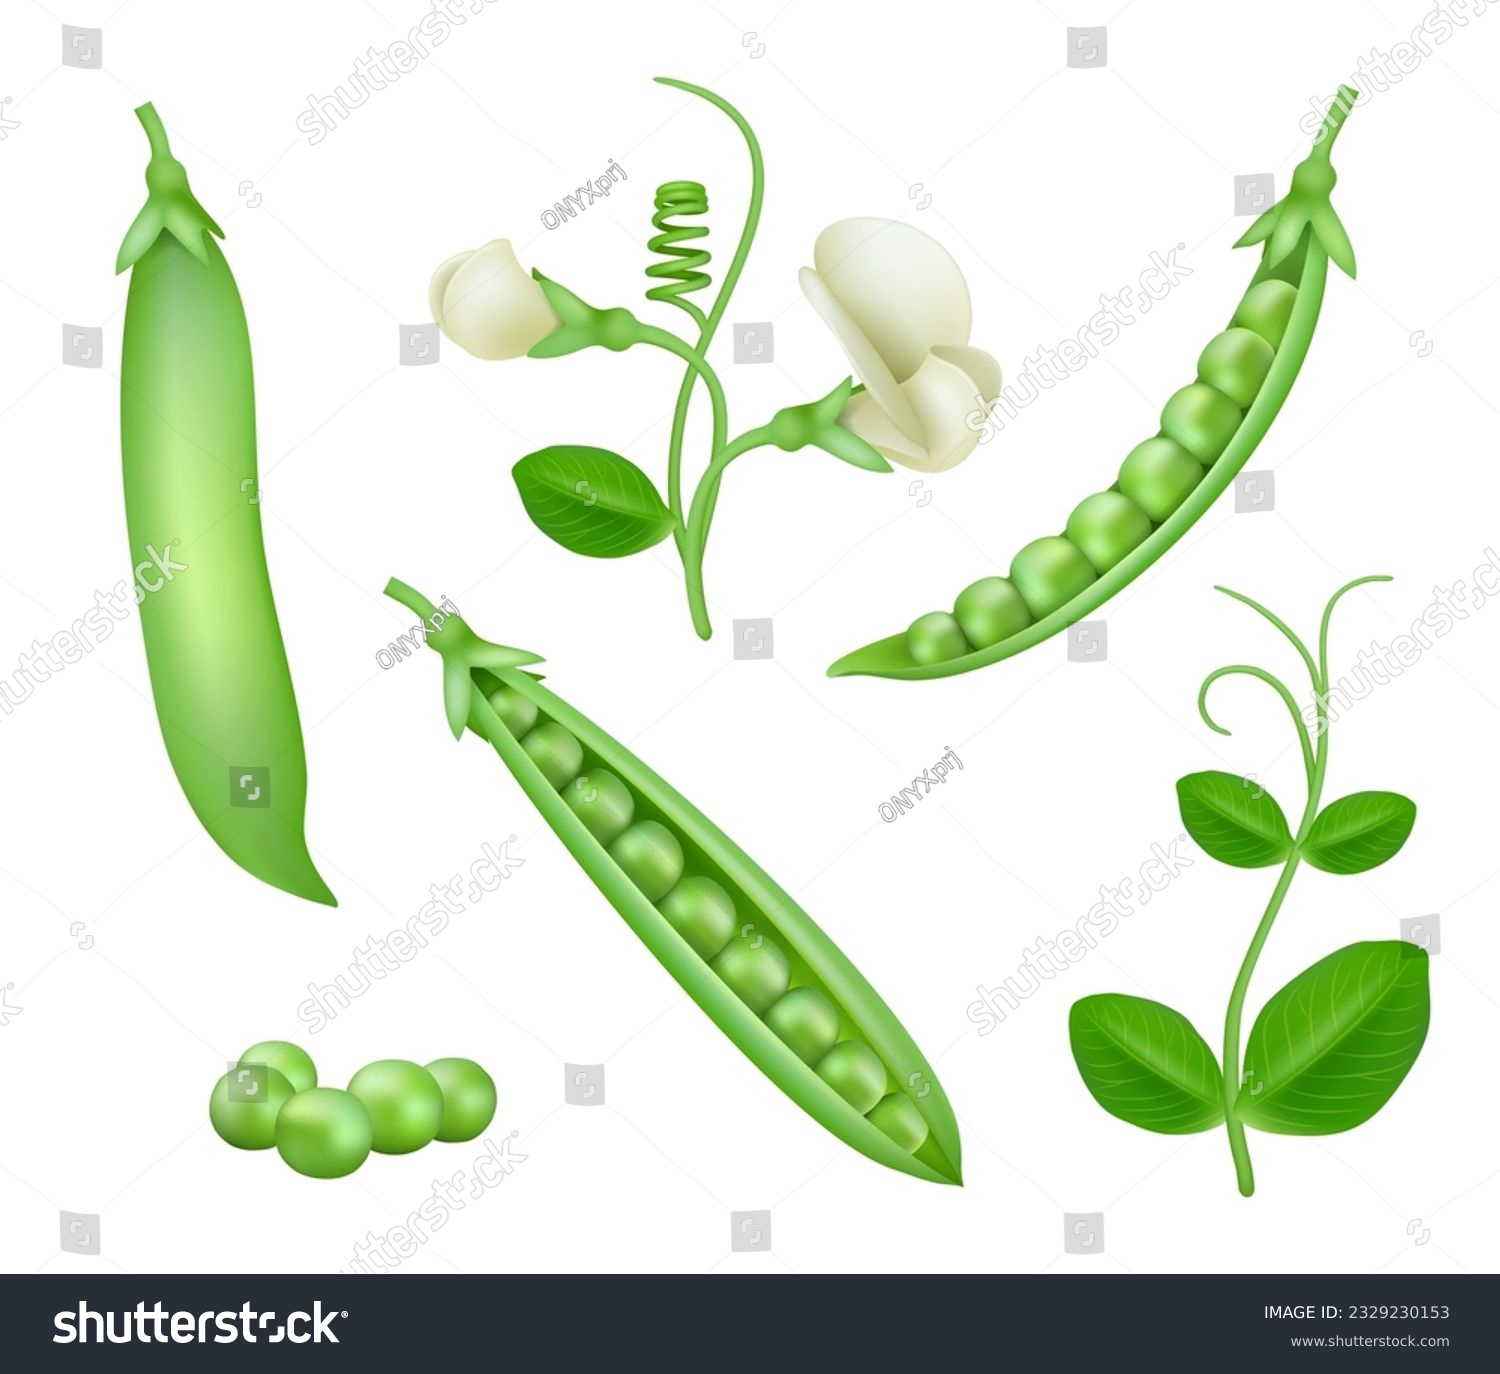 Green peas. Vegan natural food green pea pods healthy products decent vector collection set #2329230153